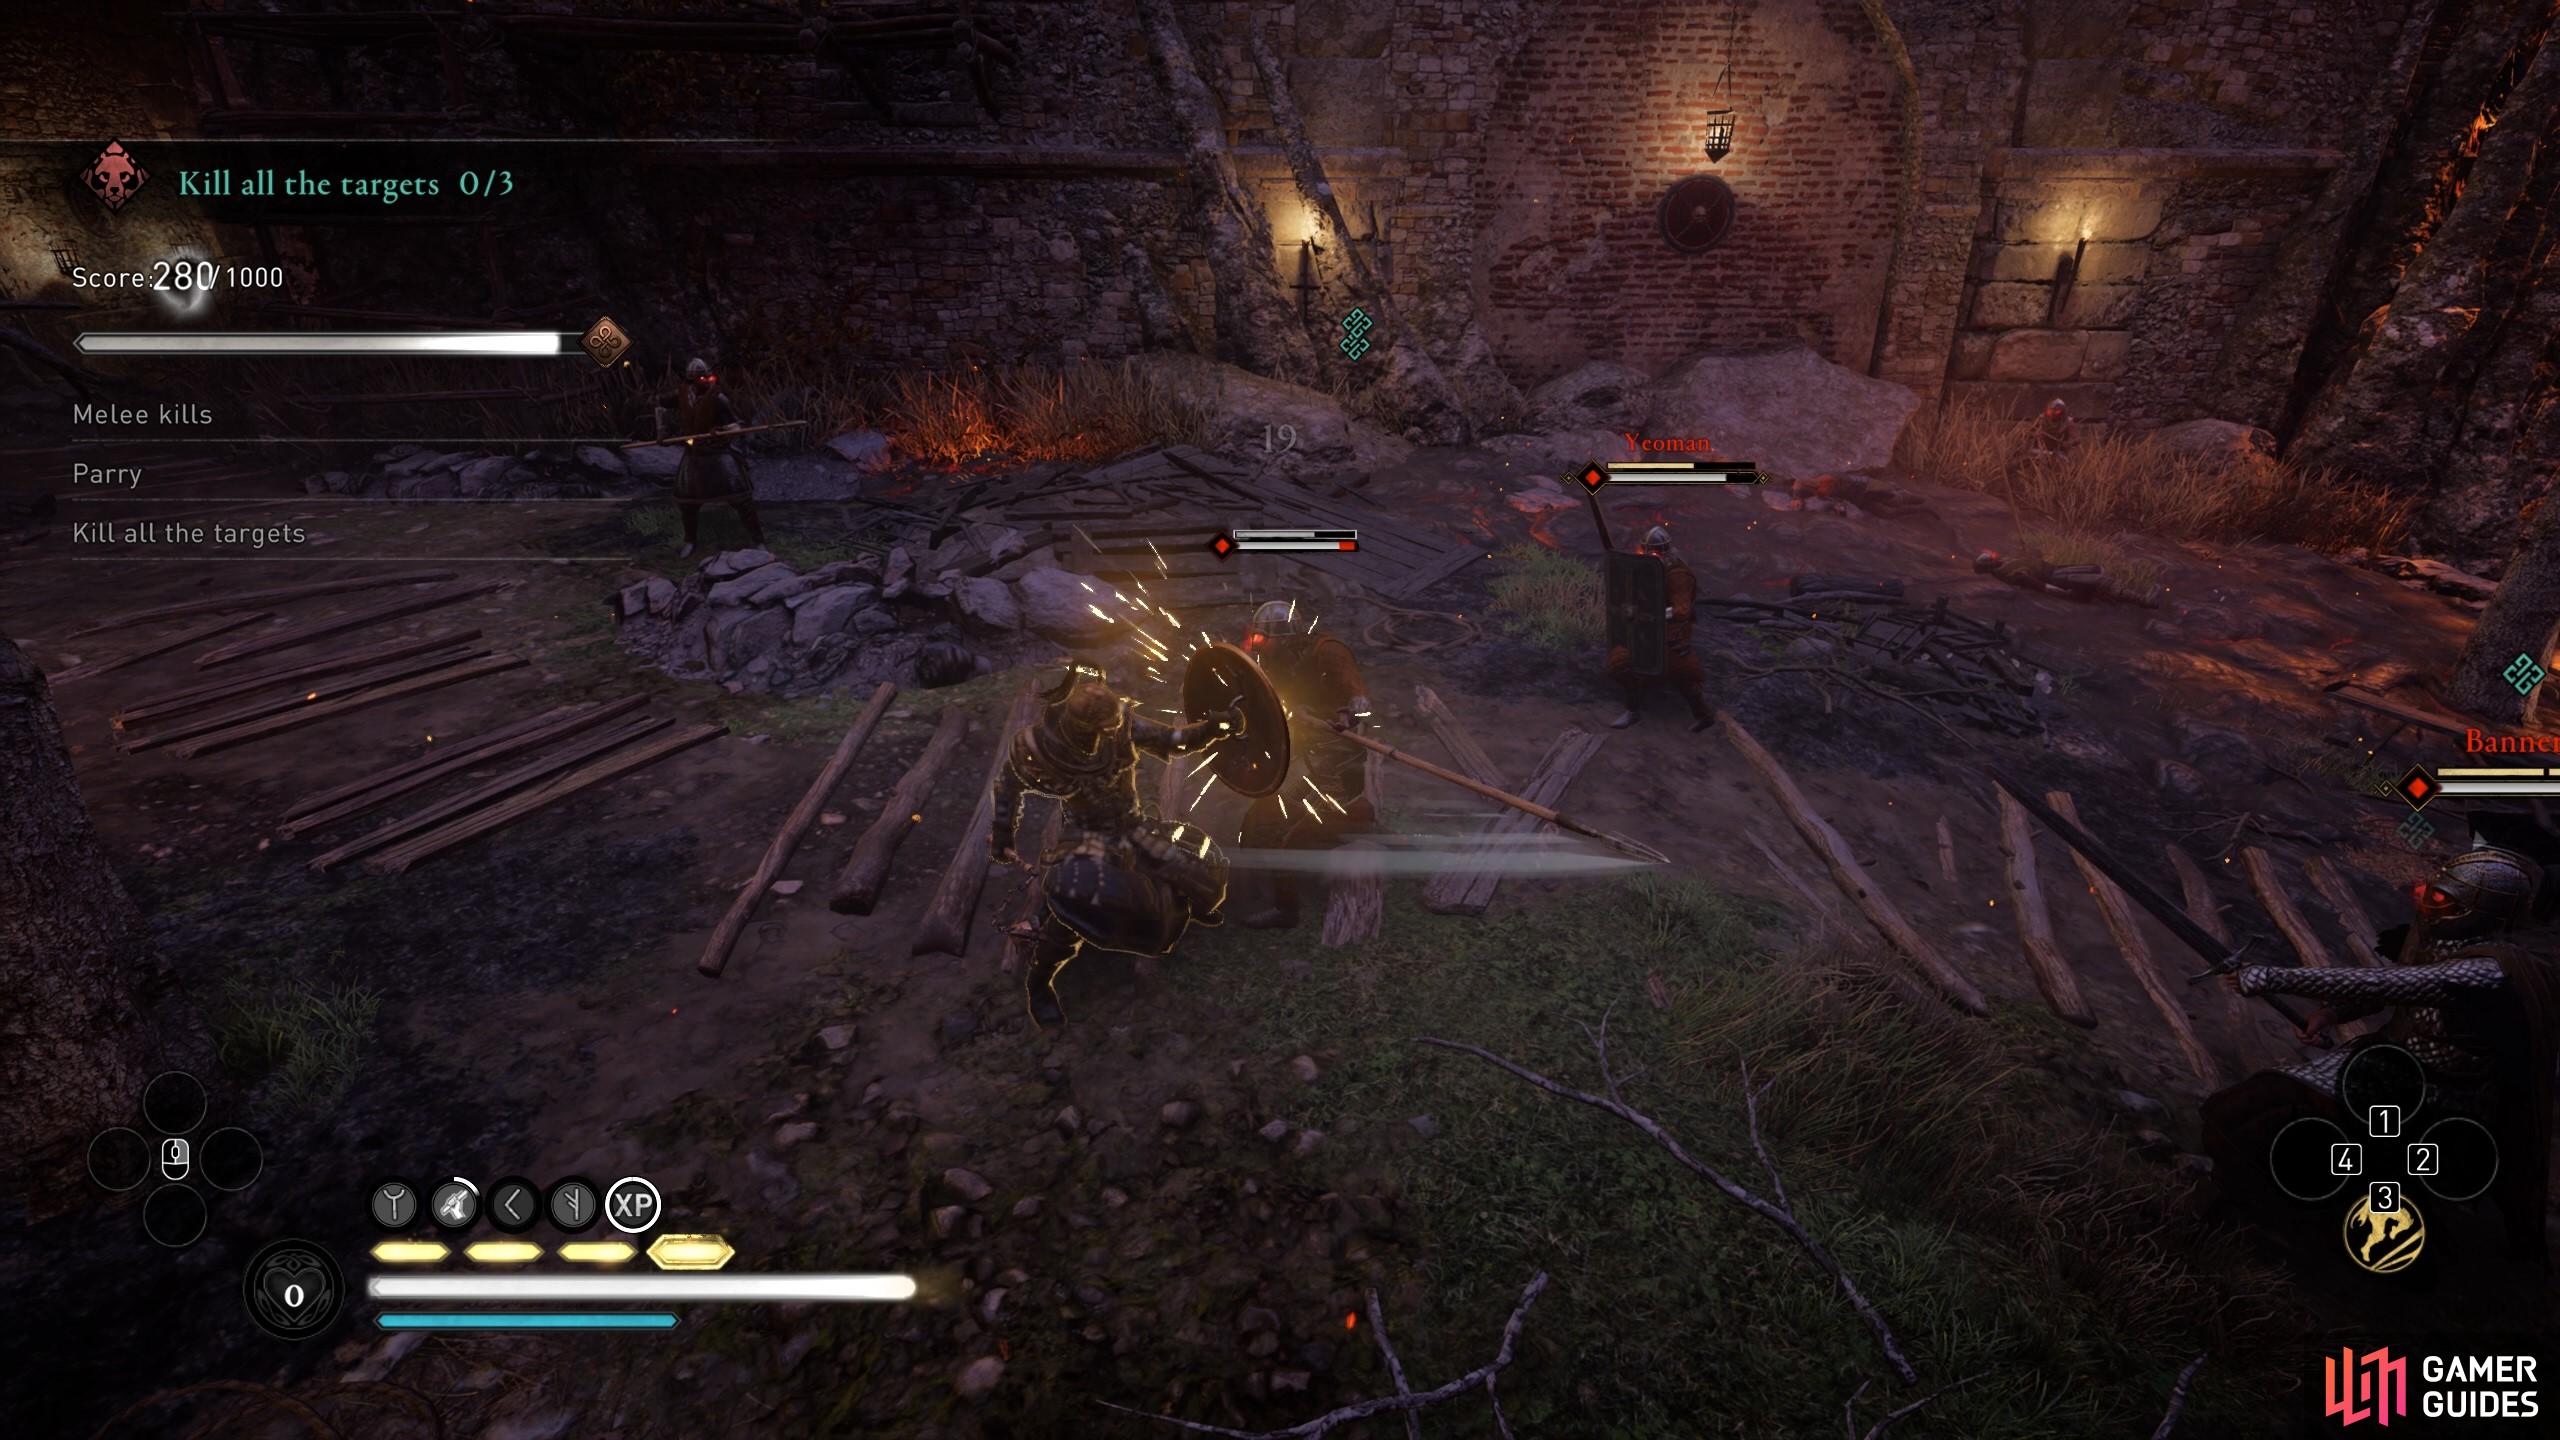 You'll earn mastery points each time you parry, while also restoring some health.